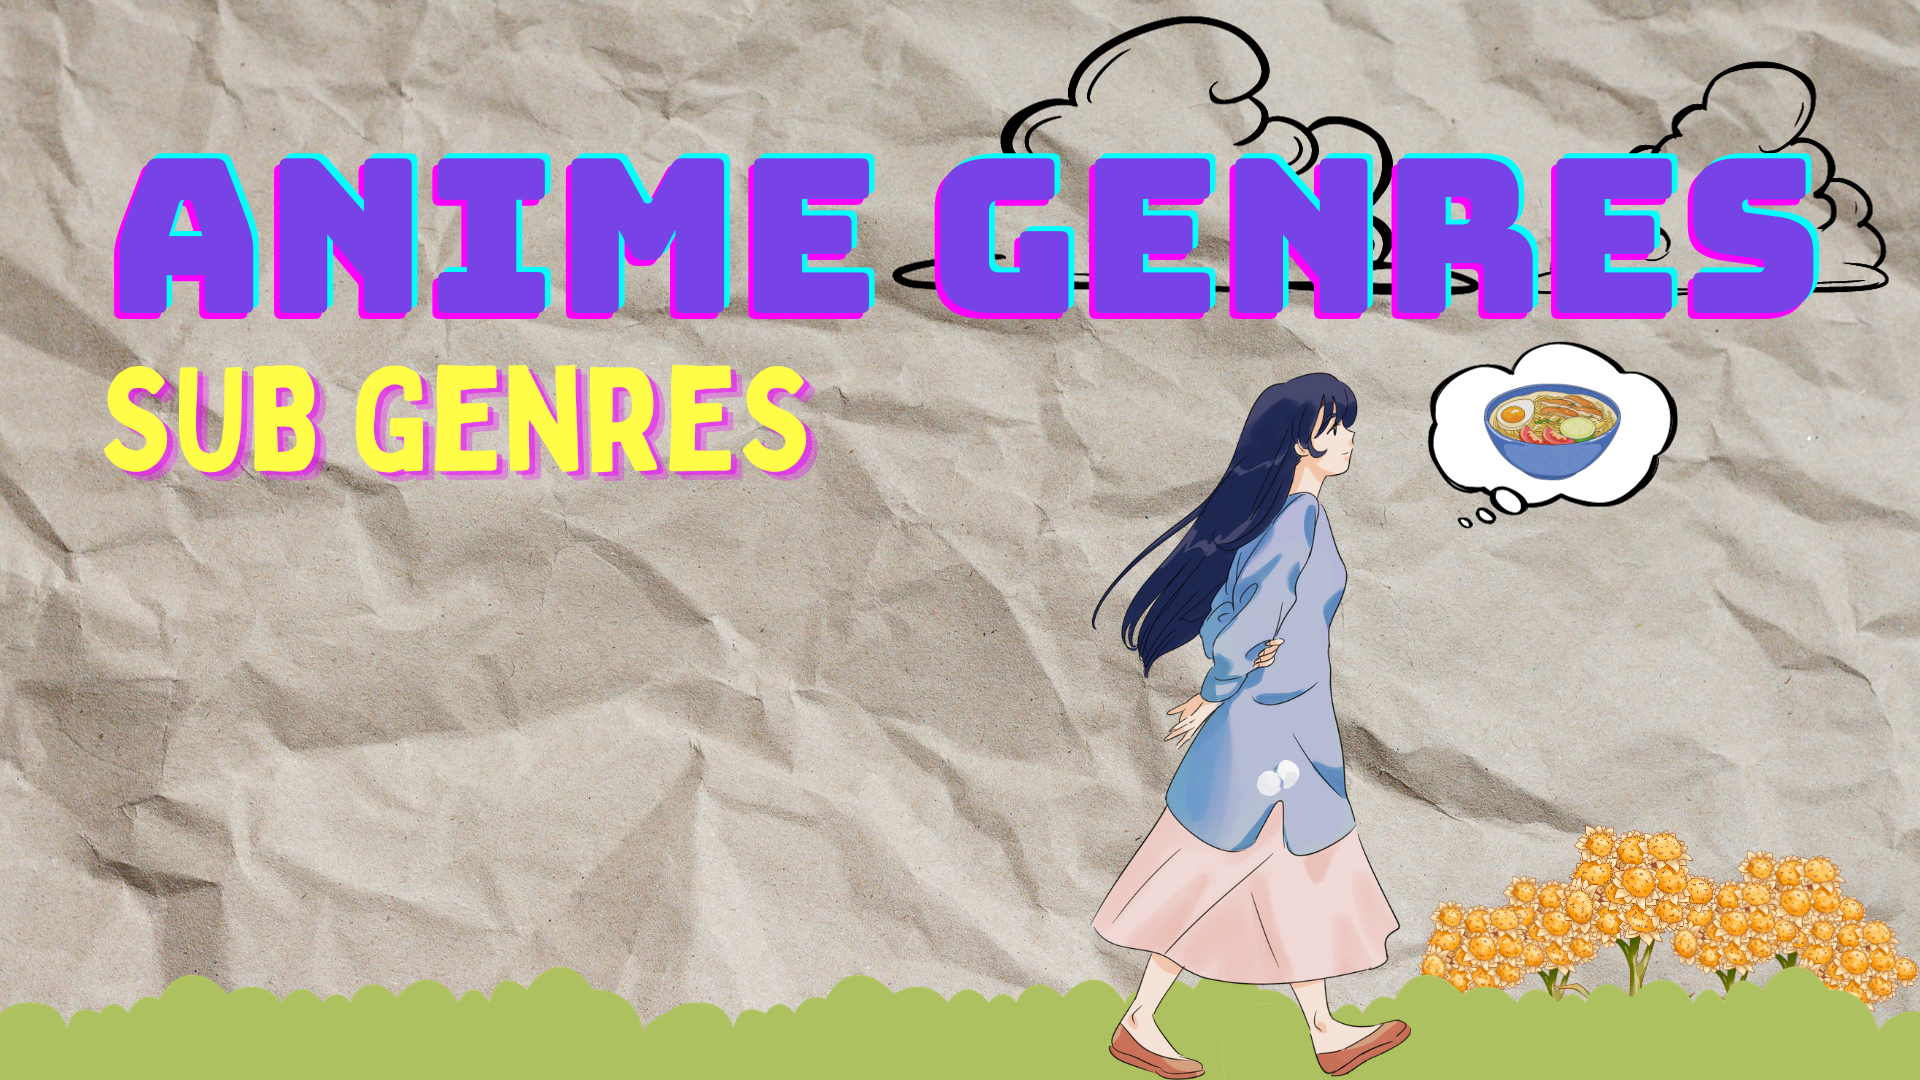 Anime Genres 101: You Thought You Knew All Anime Genres? Think Again – Sub Genres